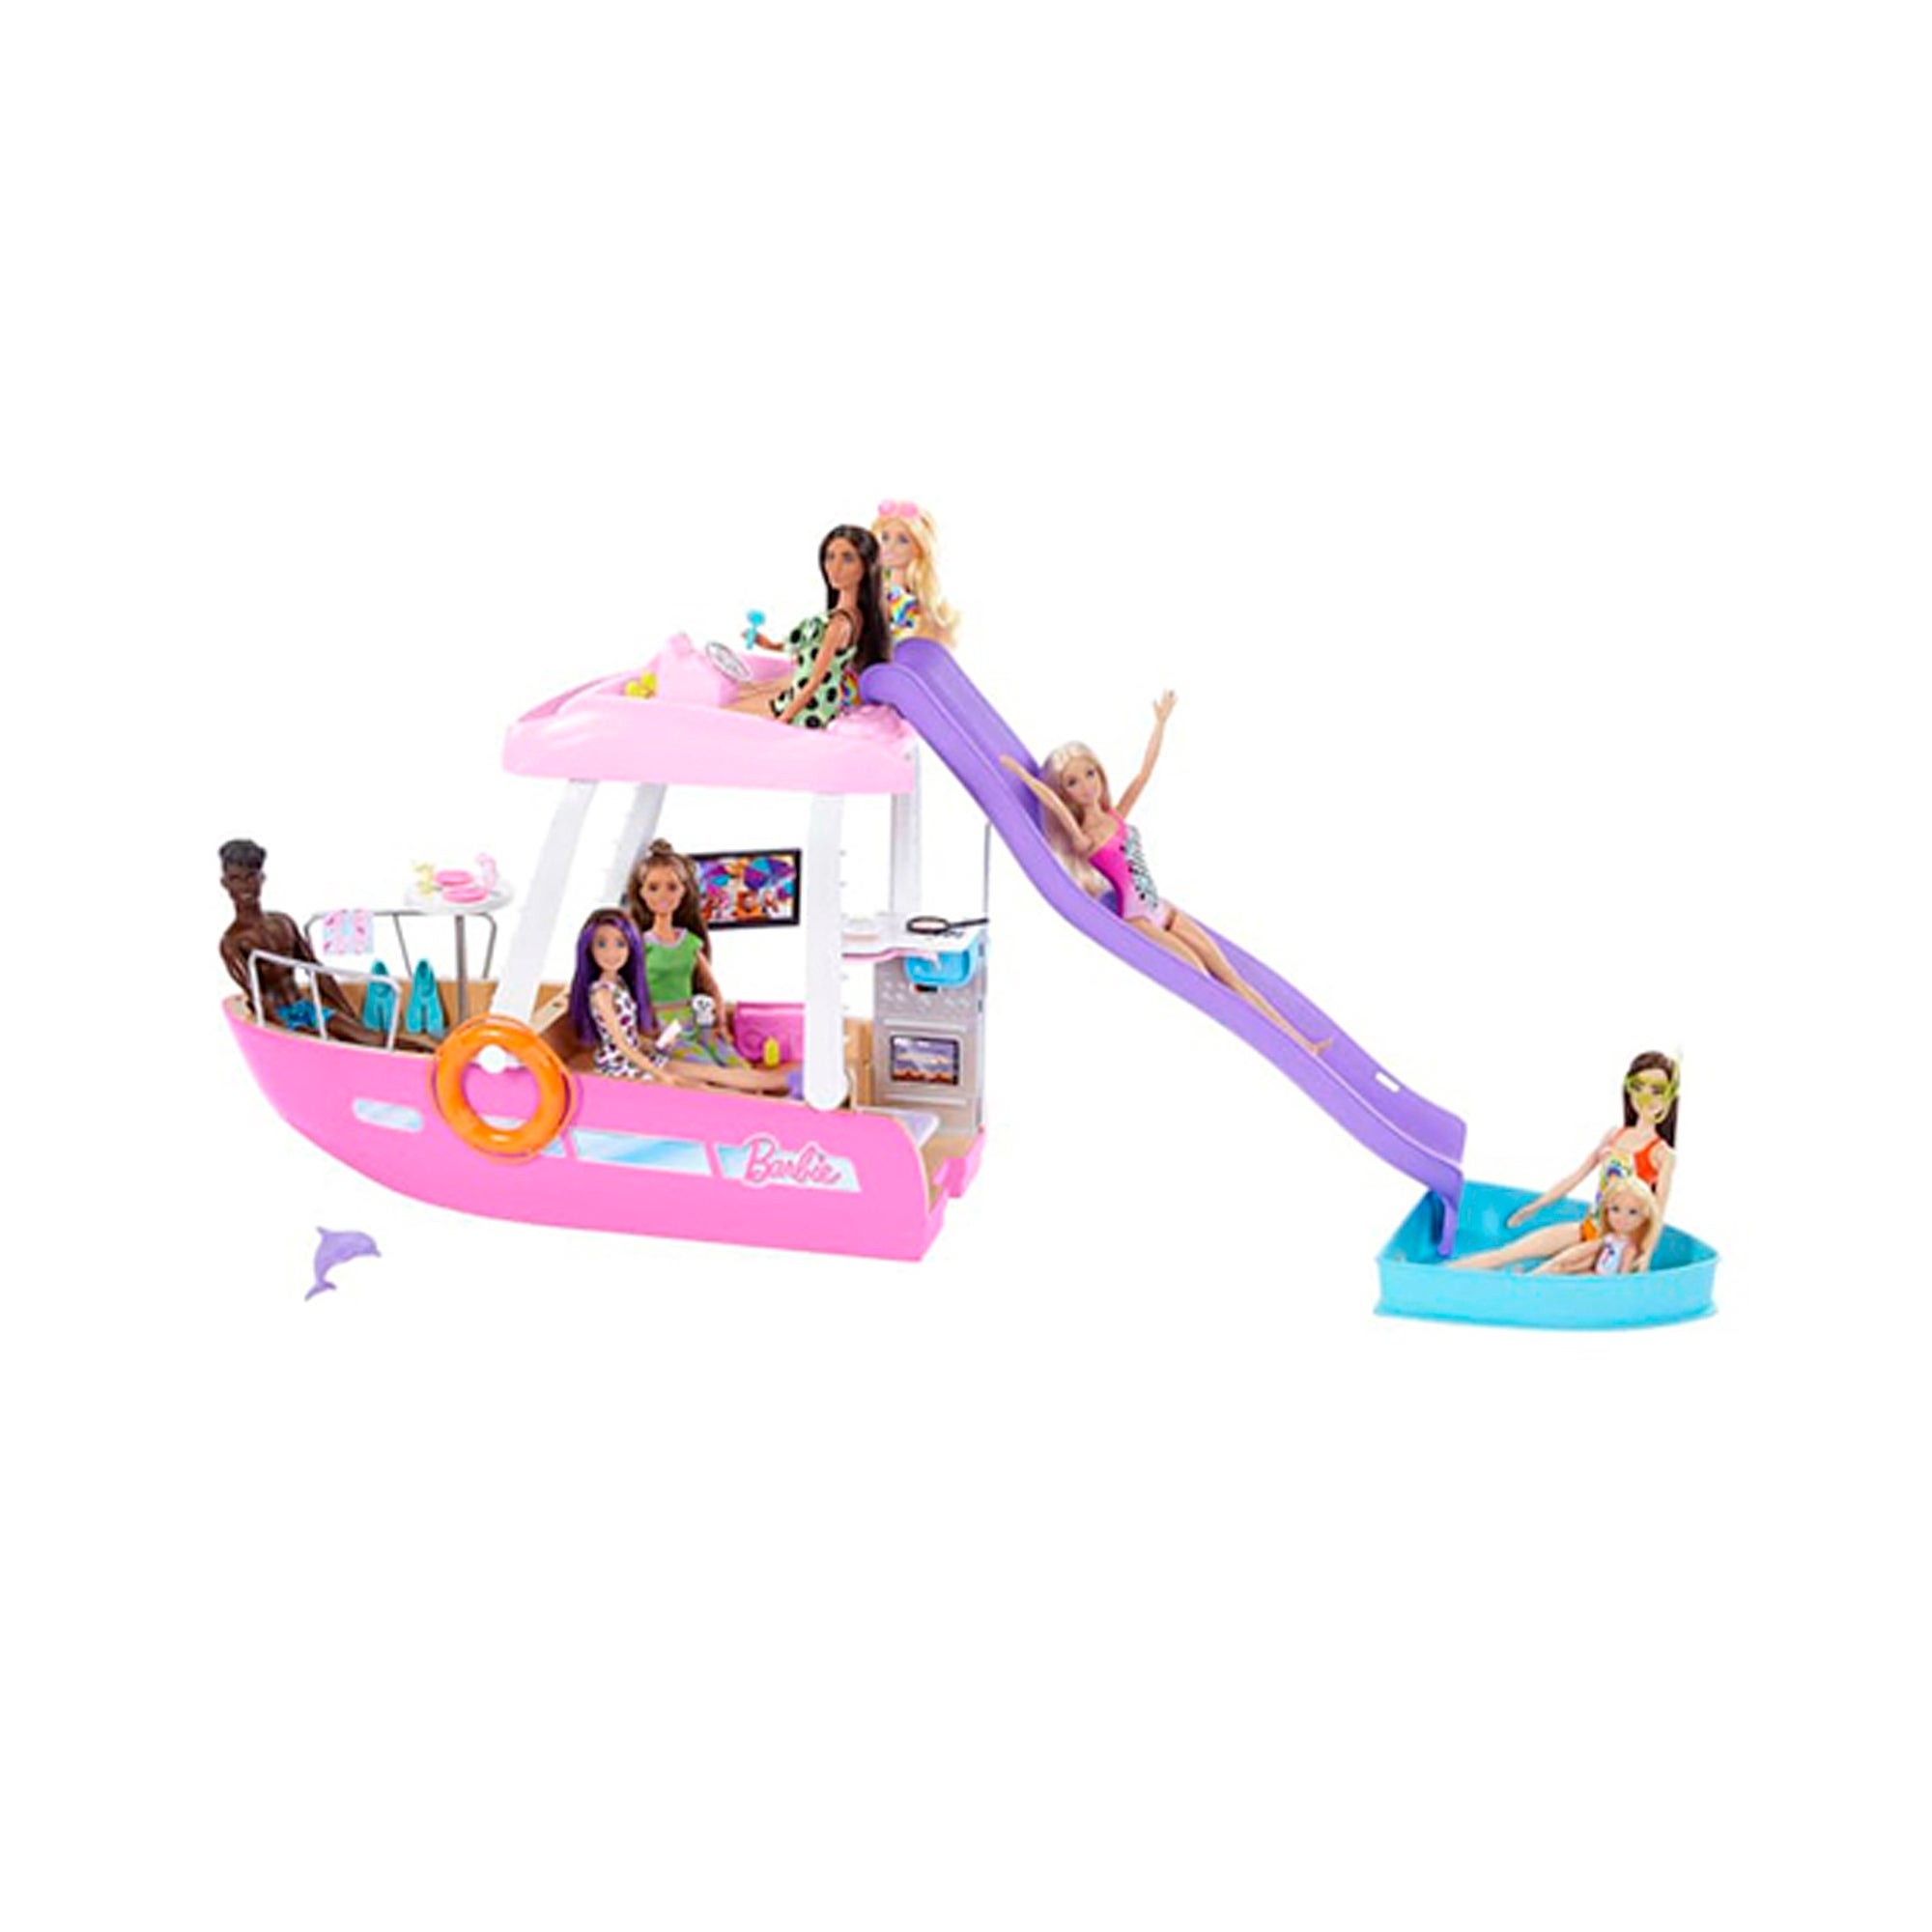 Barbie Dream Boat Playset w/ Pool Slide & Accessories Ages 3+ Years